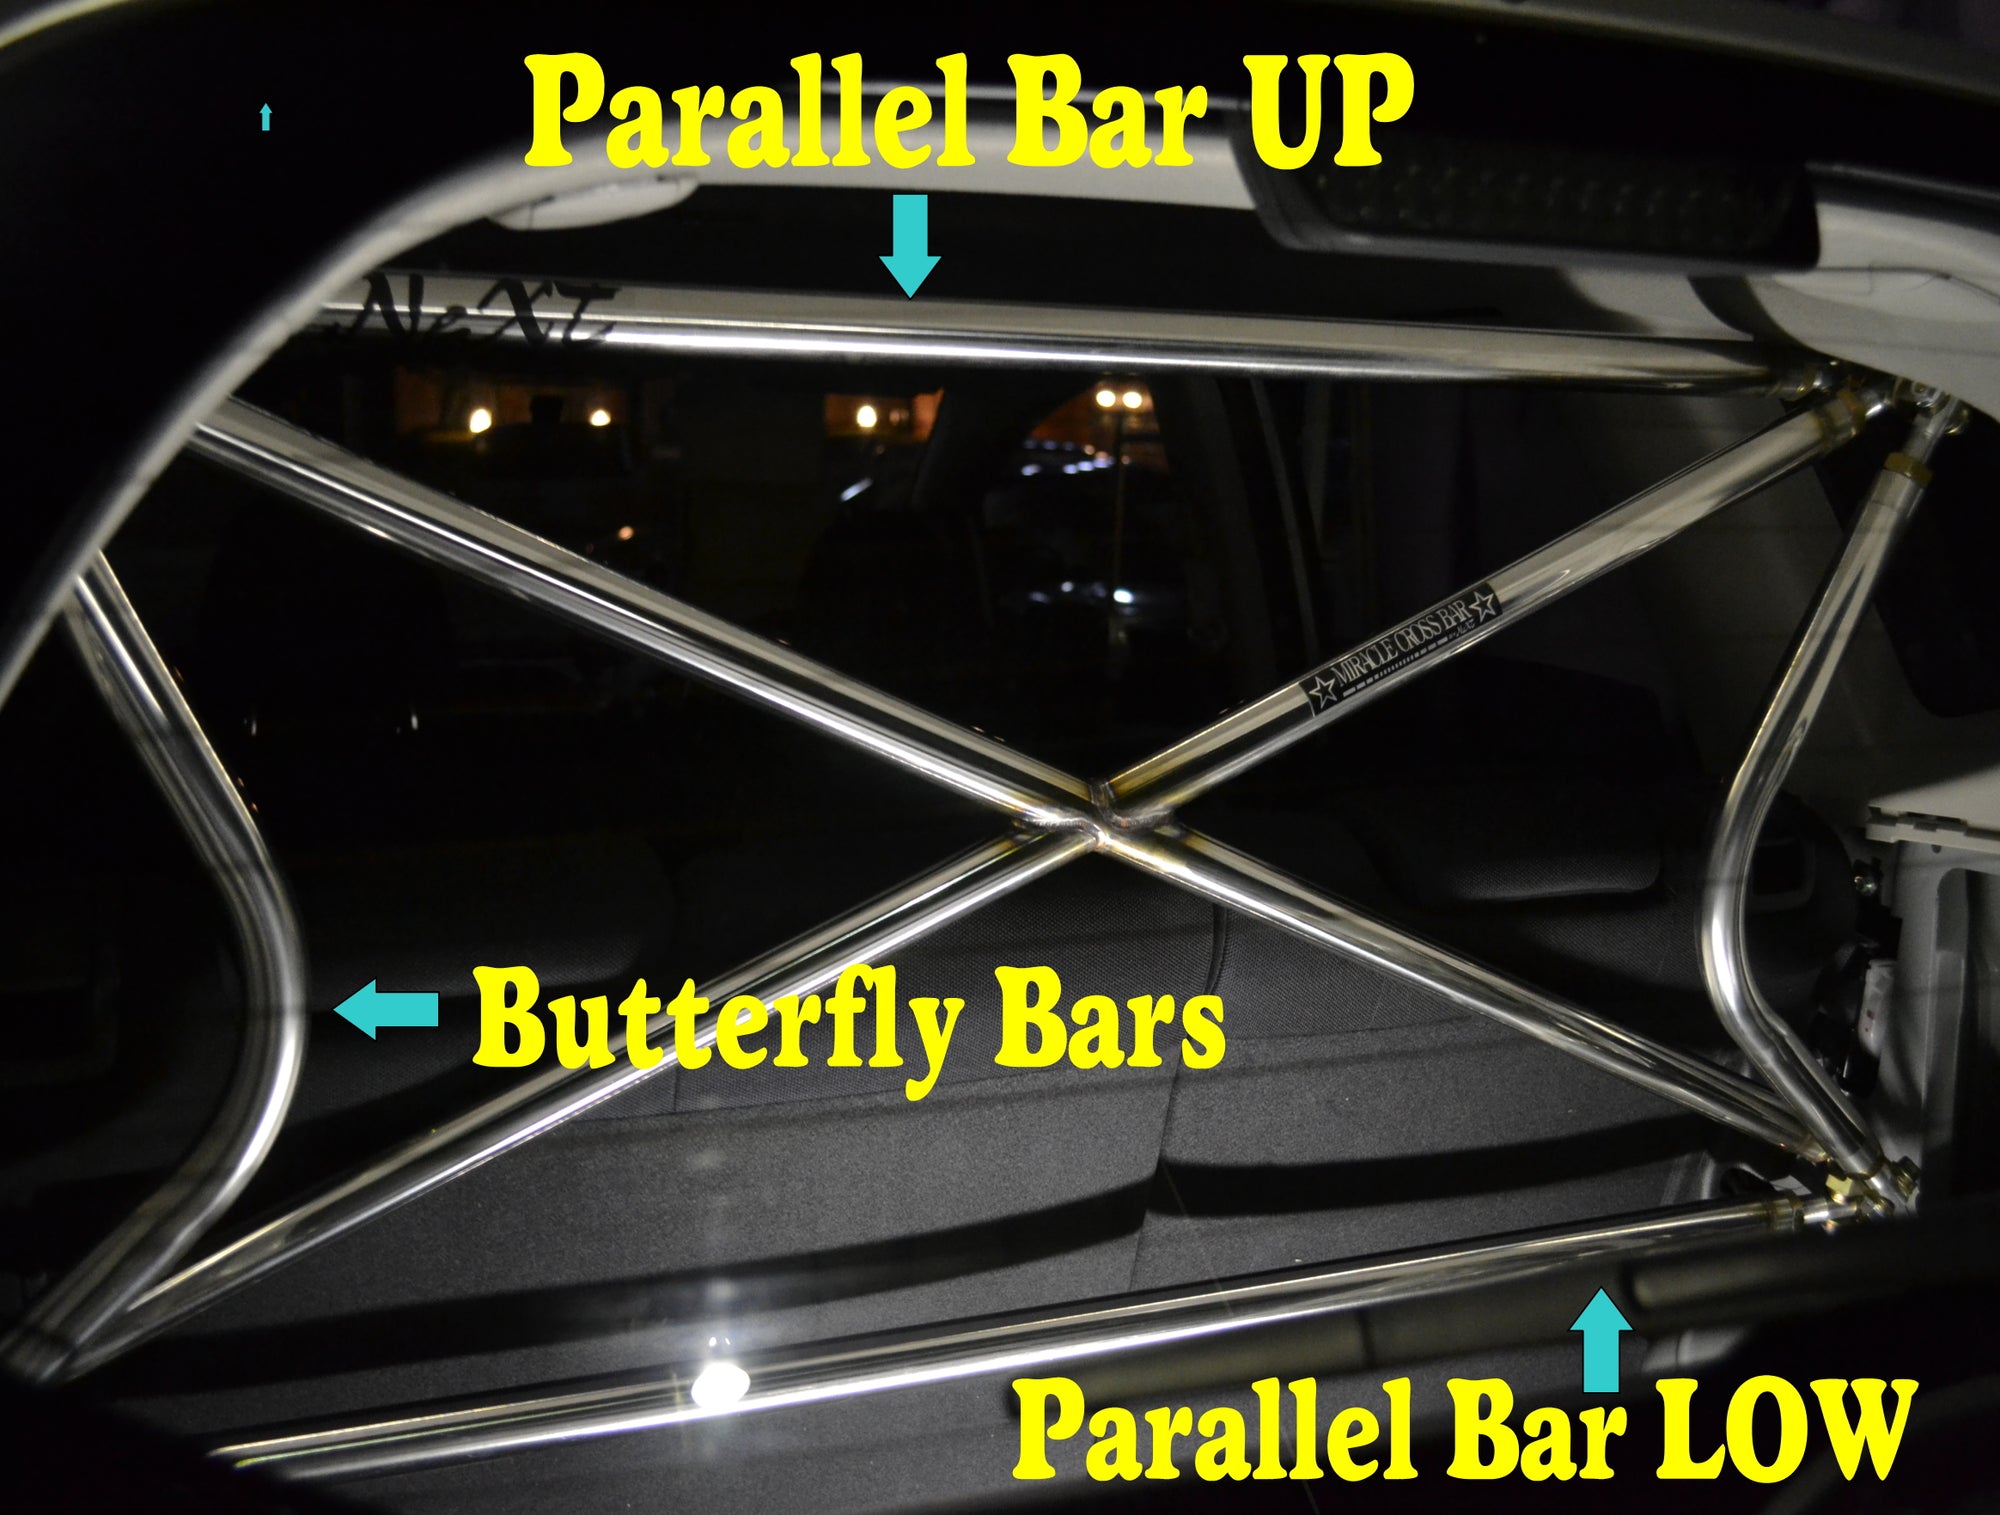 NEXT MIRACLE CROSS BAR PARALLEL BAR UP STAINLESS 32 FOR SUZUKI ALTO HA36 NEXT-01395